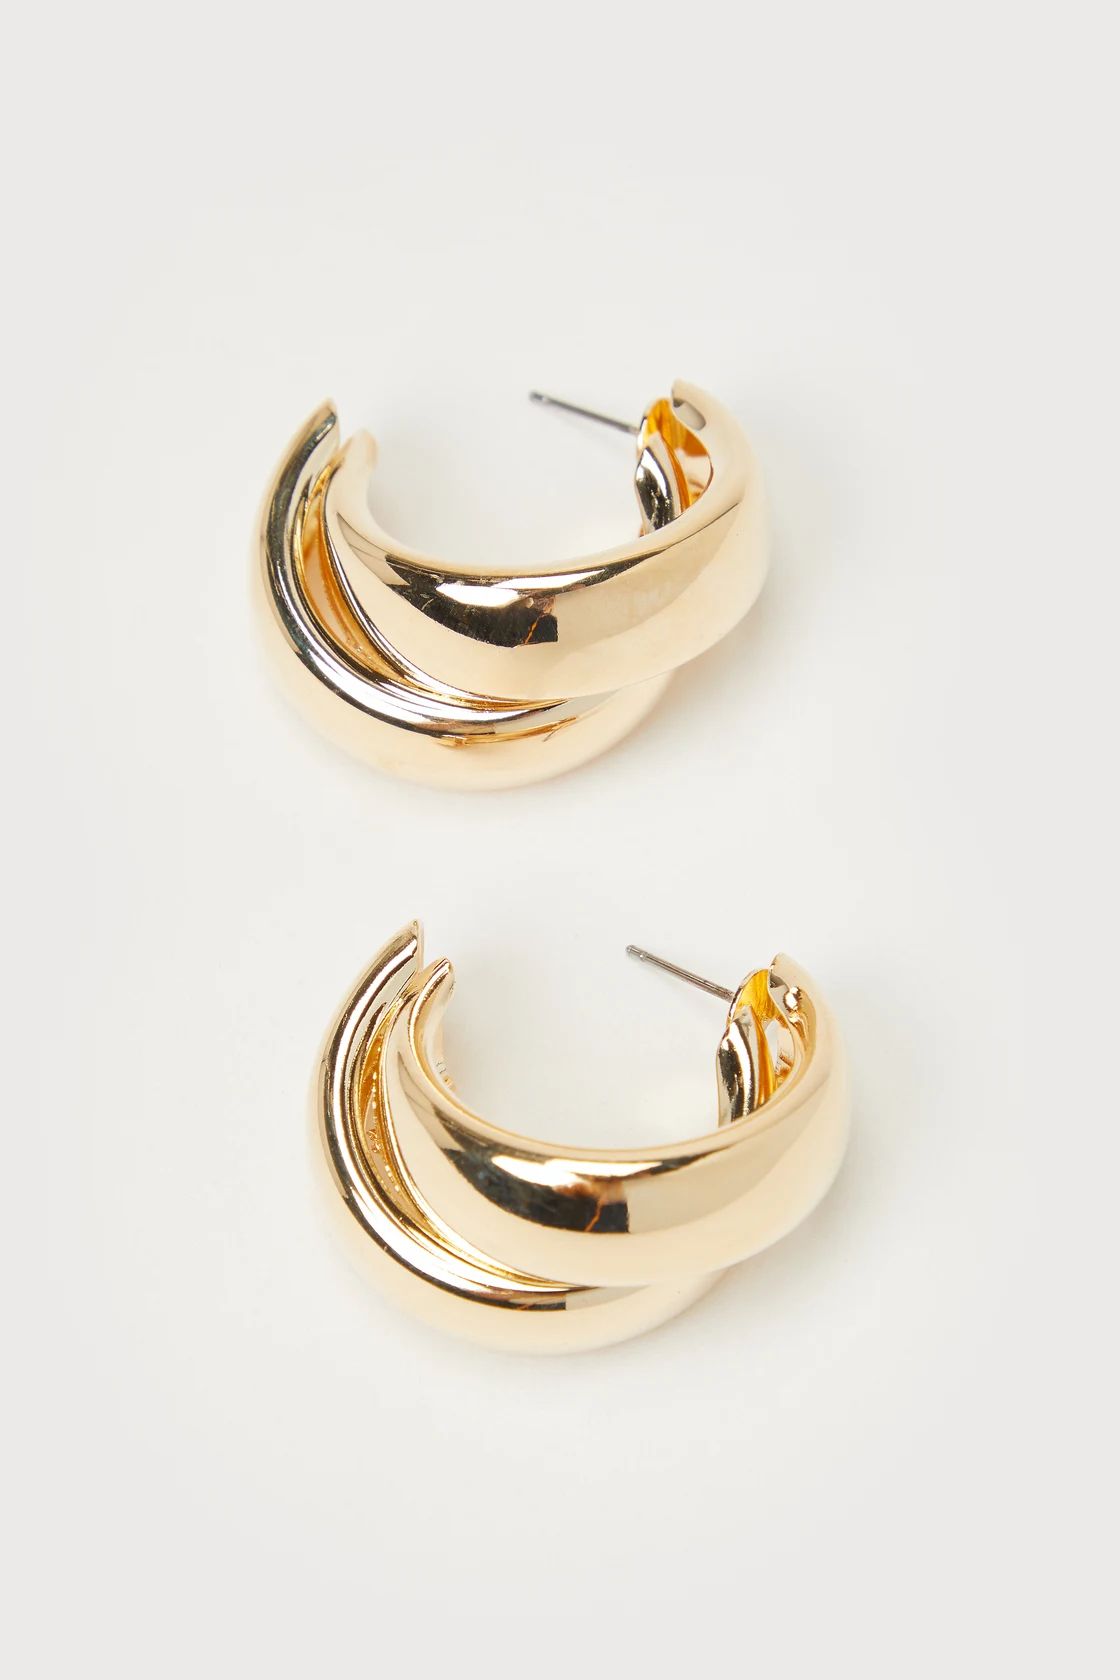 Twice the Charisma Gold Overlapping Layered Hoop Earrings | Lulus